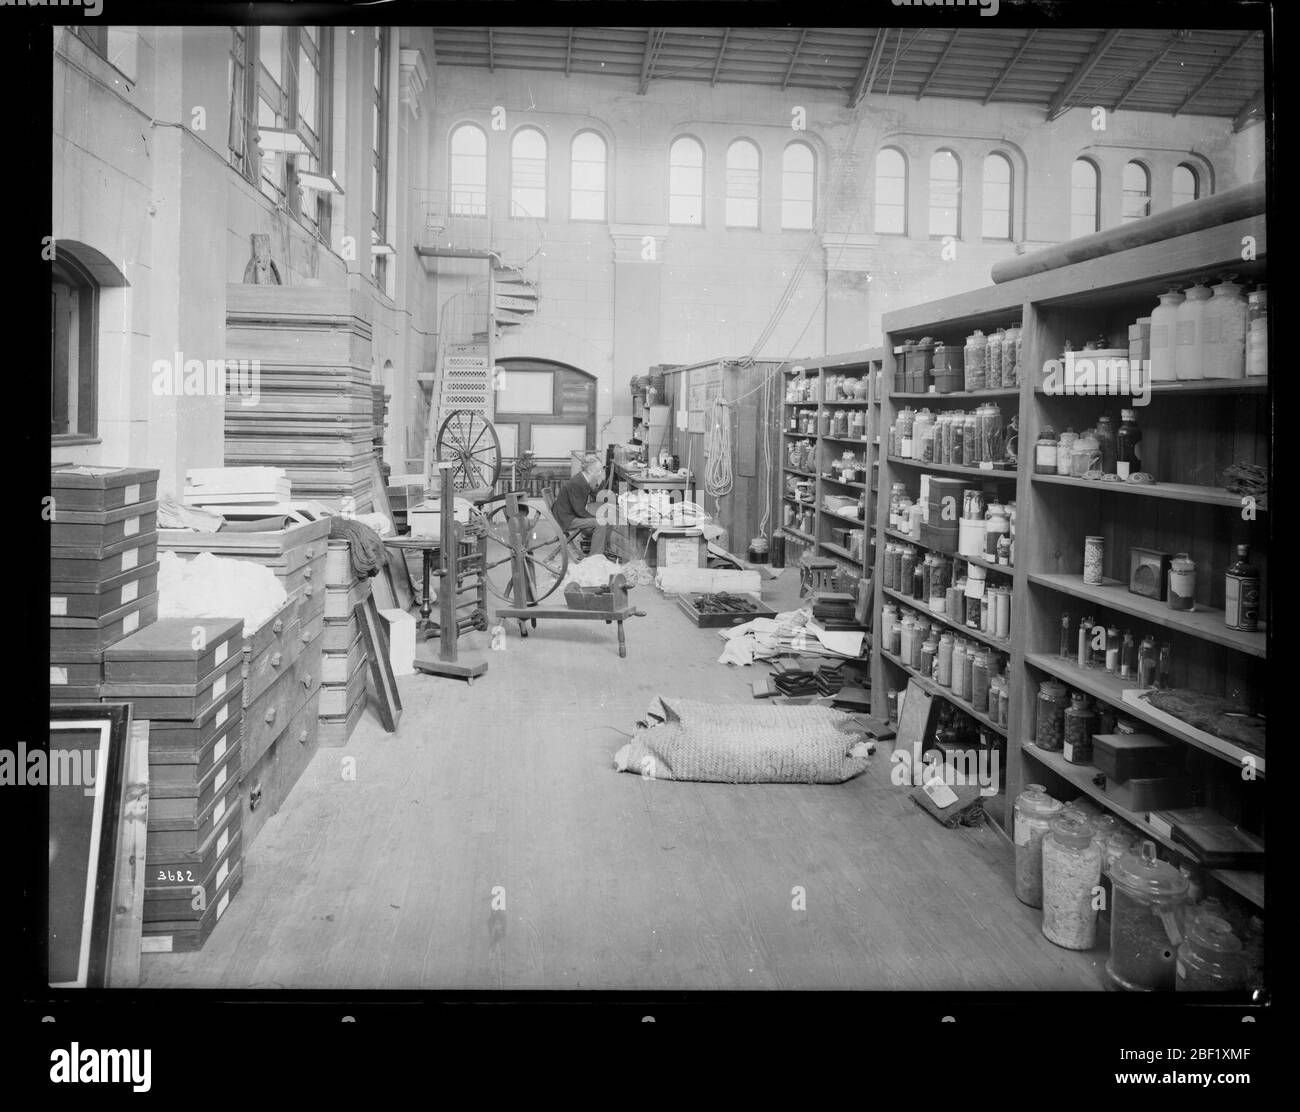 United States National Museum Workroom. Workroom on the second floor of the United States National Museum, now known as the Arts and Industries Building.Smithsonian Institution Archives, Acc. 11-006, Box 009, Image No. Stock Photo